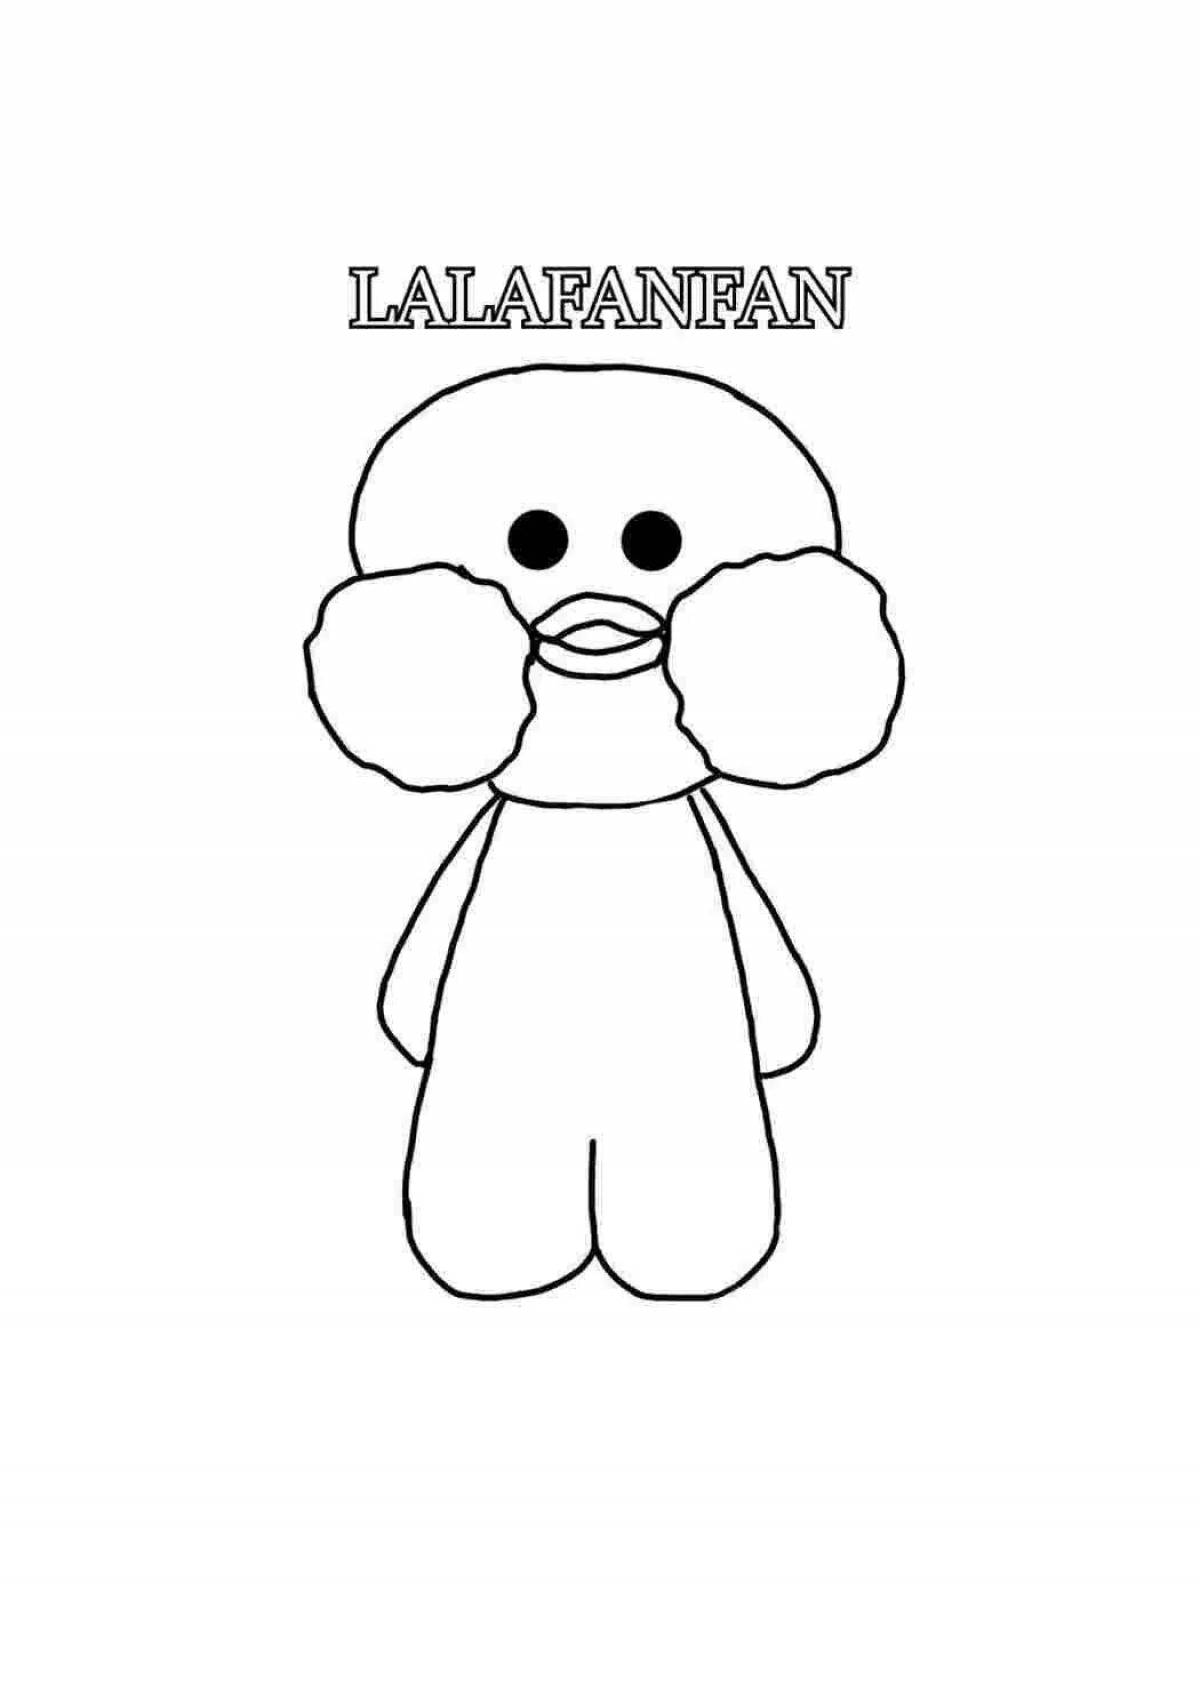 Lalafanfan amazing duck coloring page